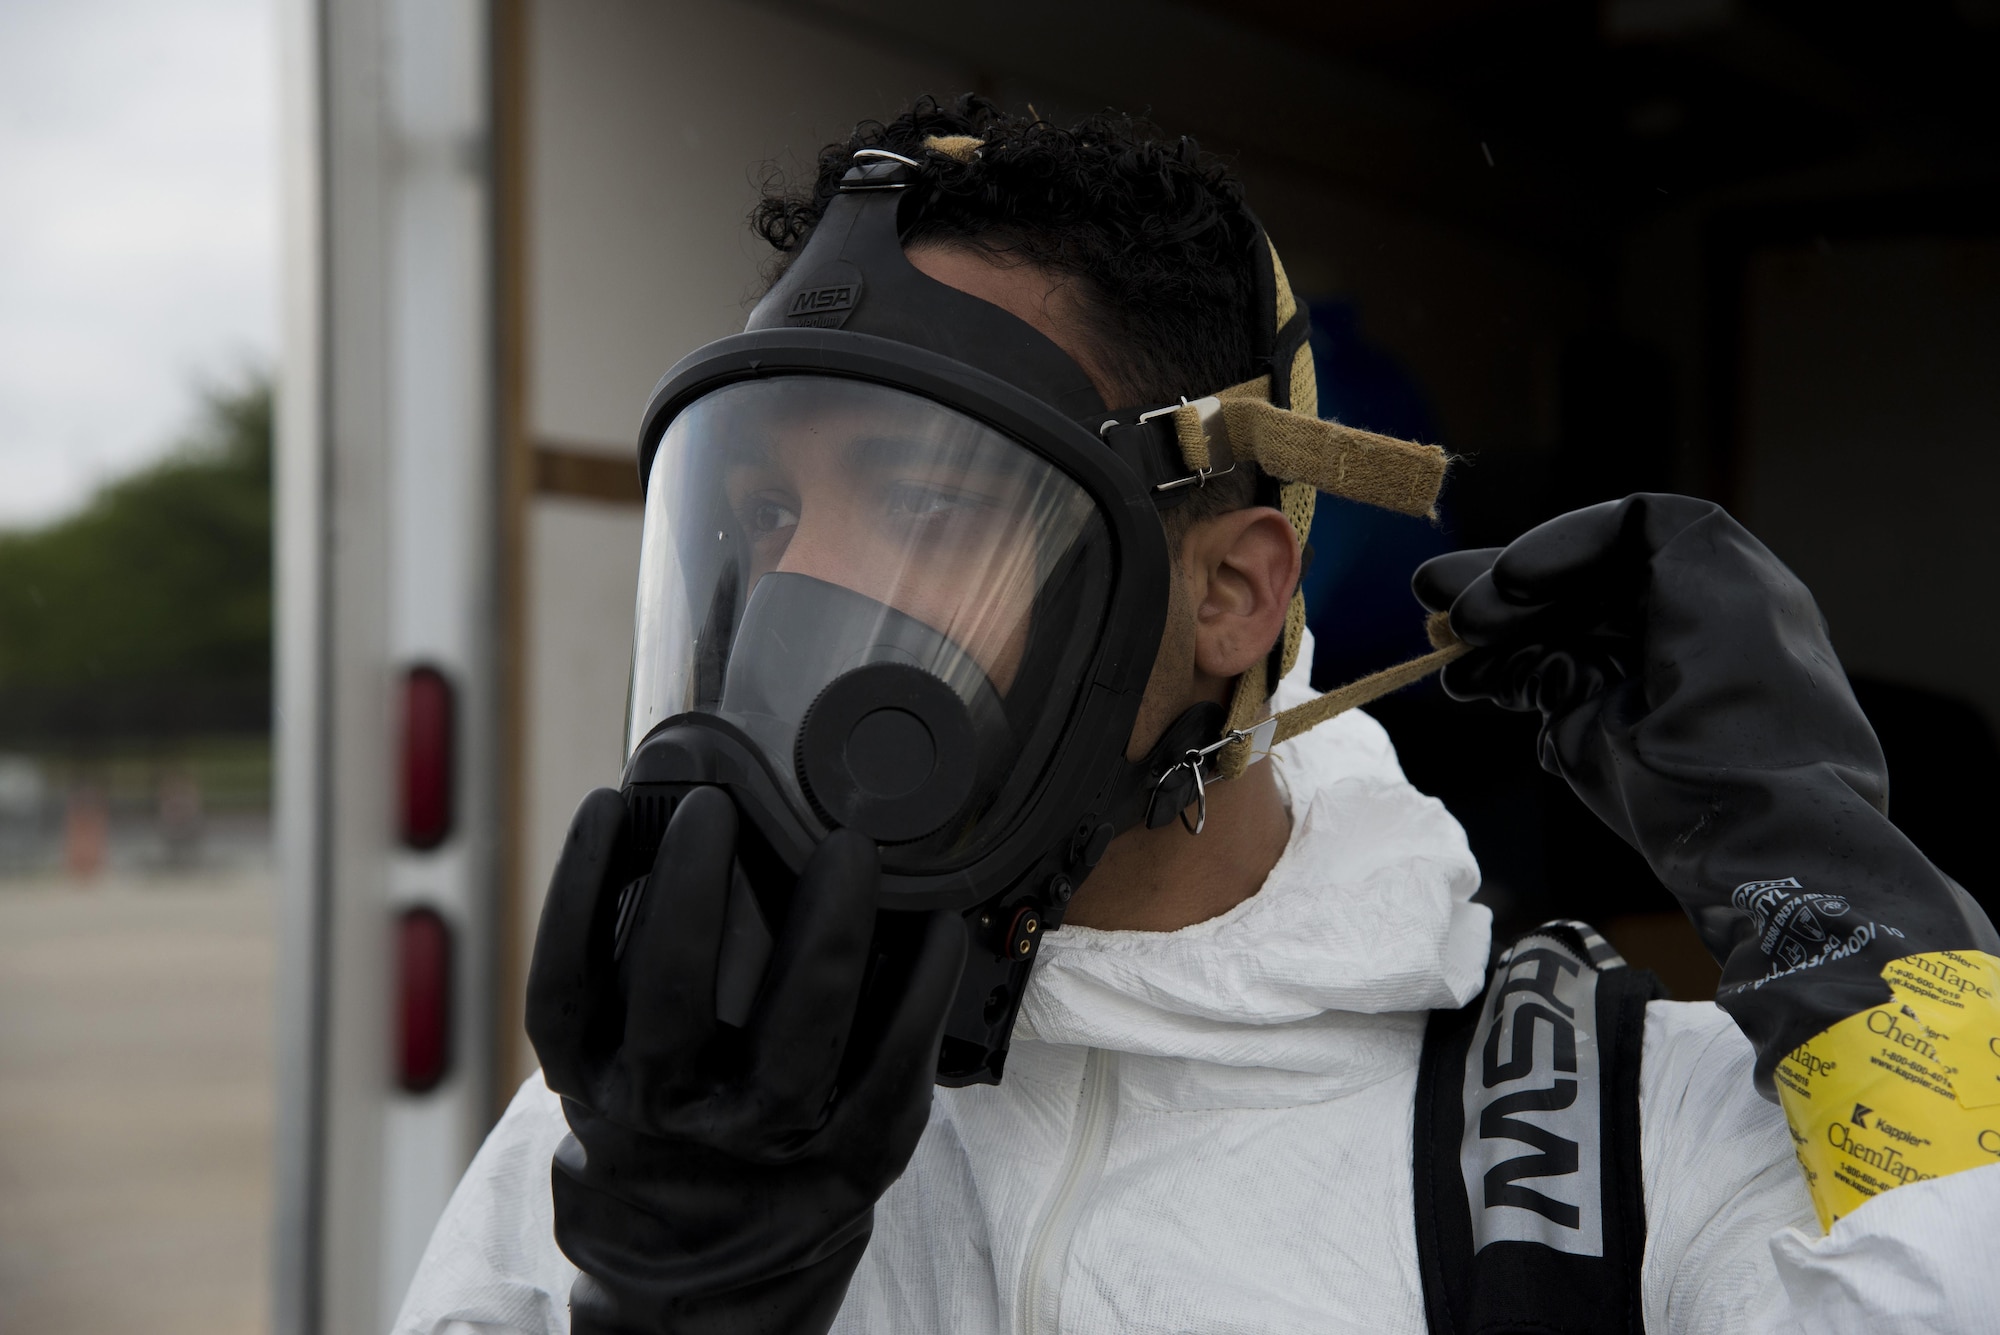 Senior Airman Jorge Rijo, 436th Aerospace Medicine Squadron bioenvironmental engineering technician, adjusts his respirator during a fuel spill exercise April 20, 2017, at Dover Air Force Base, Del. Rijo and a coworker prepared to measure air quality at the site of a simulated fuel spill. (U.S. Air Force photo by Senior Airman Aaron J. Jenne)